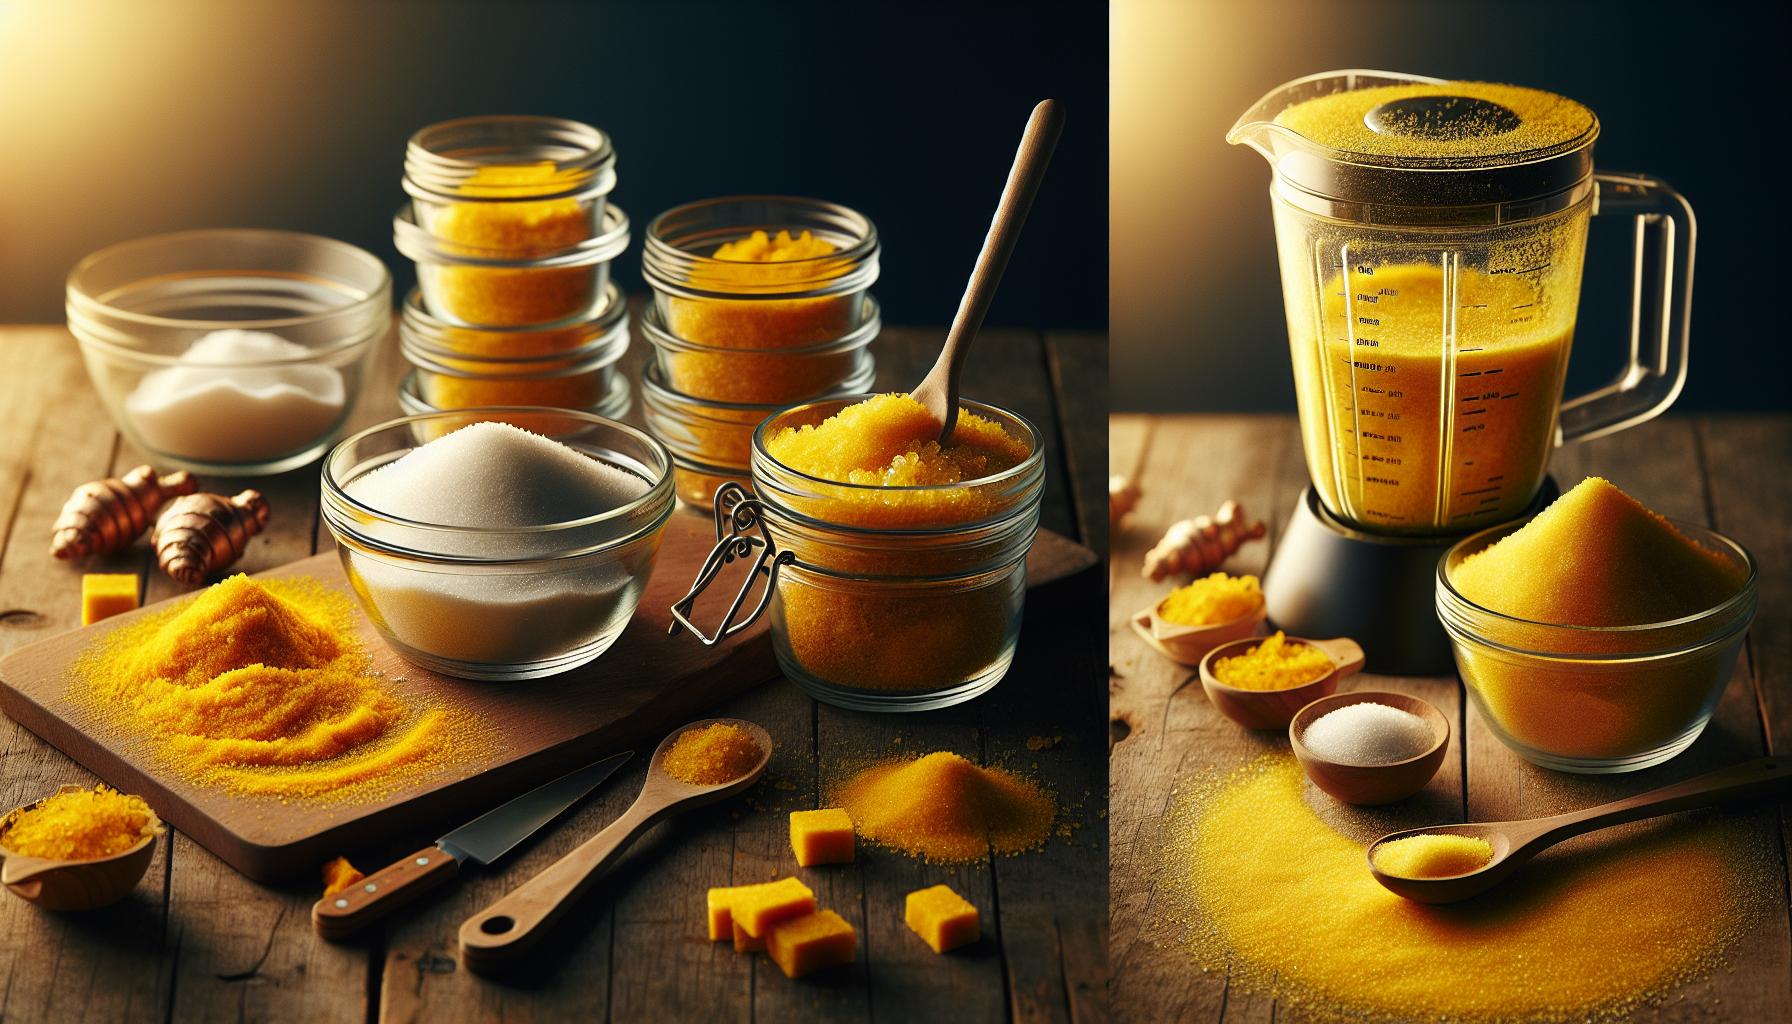 From Melding to Mixing: Creating Your Turmeric​ Sugar Scrub at Home